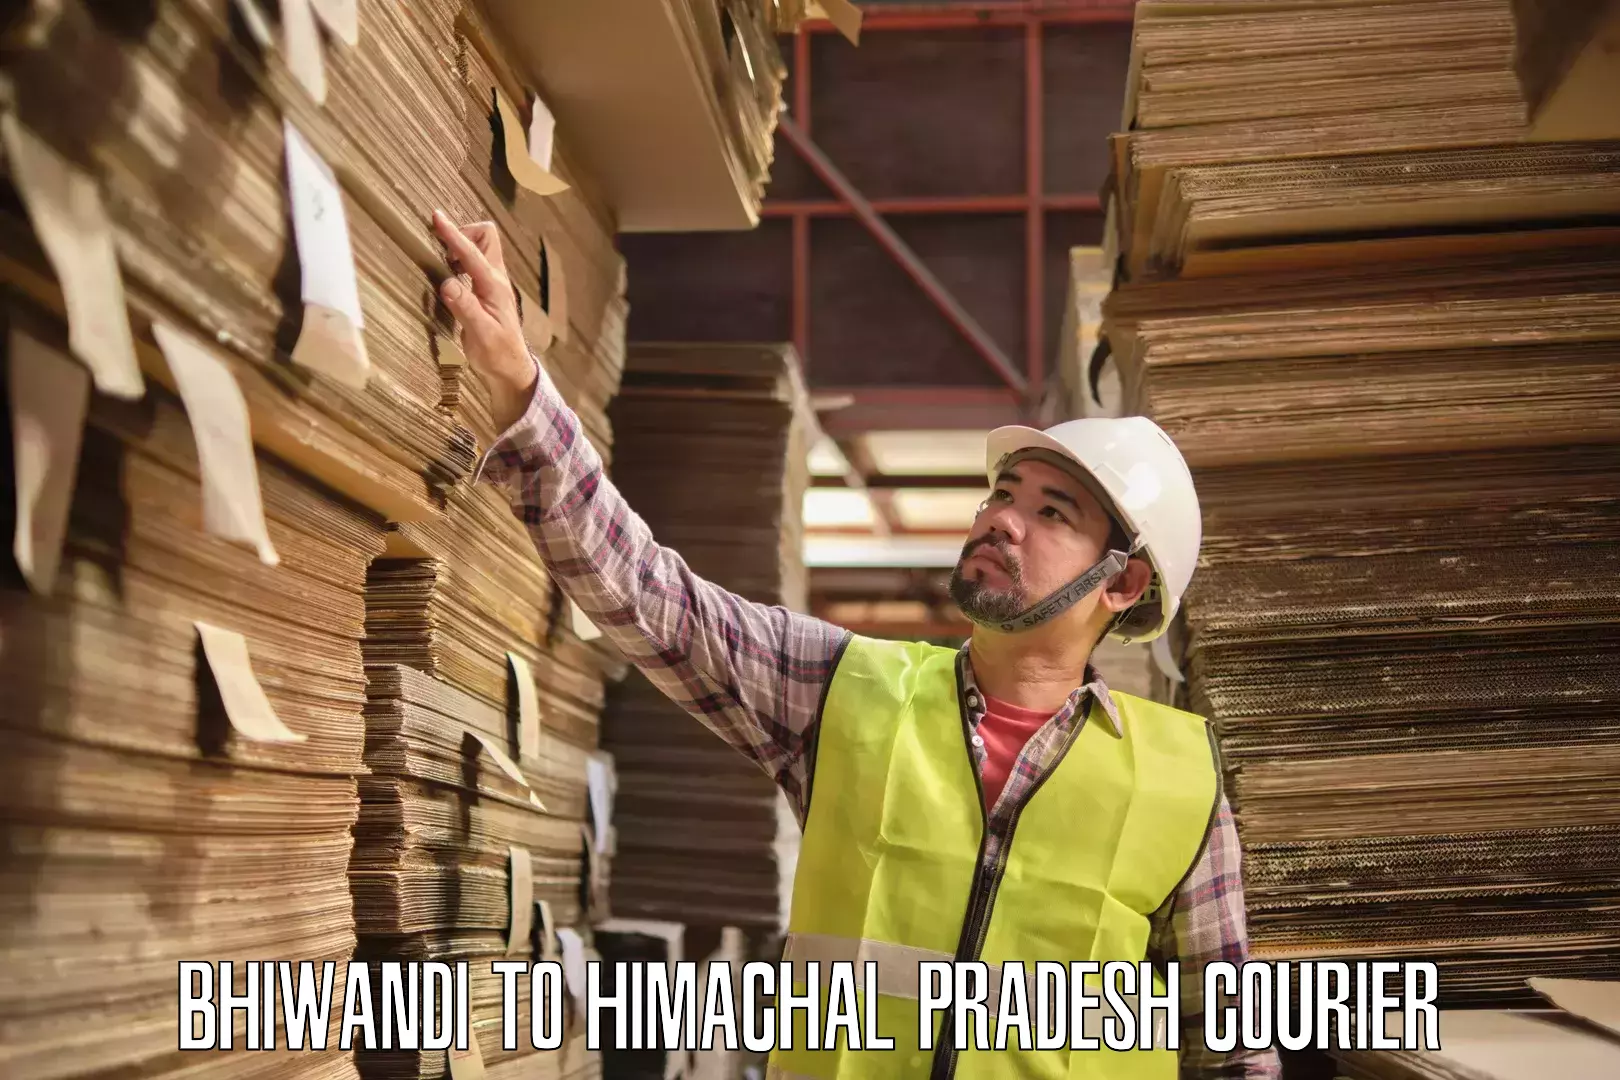 Automated parcel services Bhiwandi to Himachal Pradesh